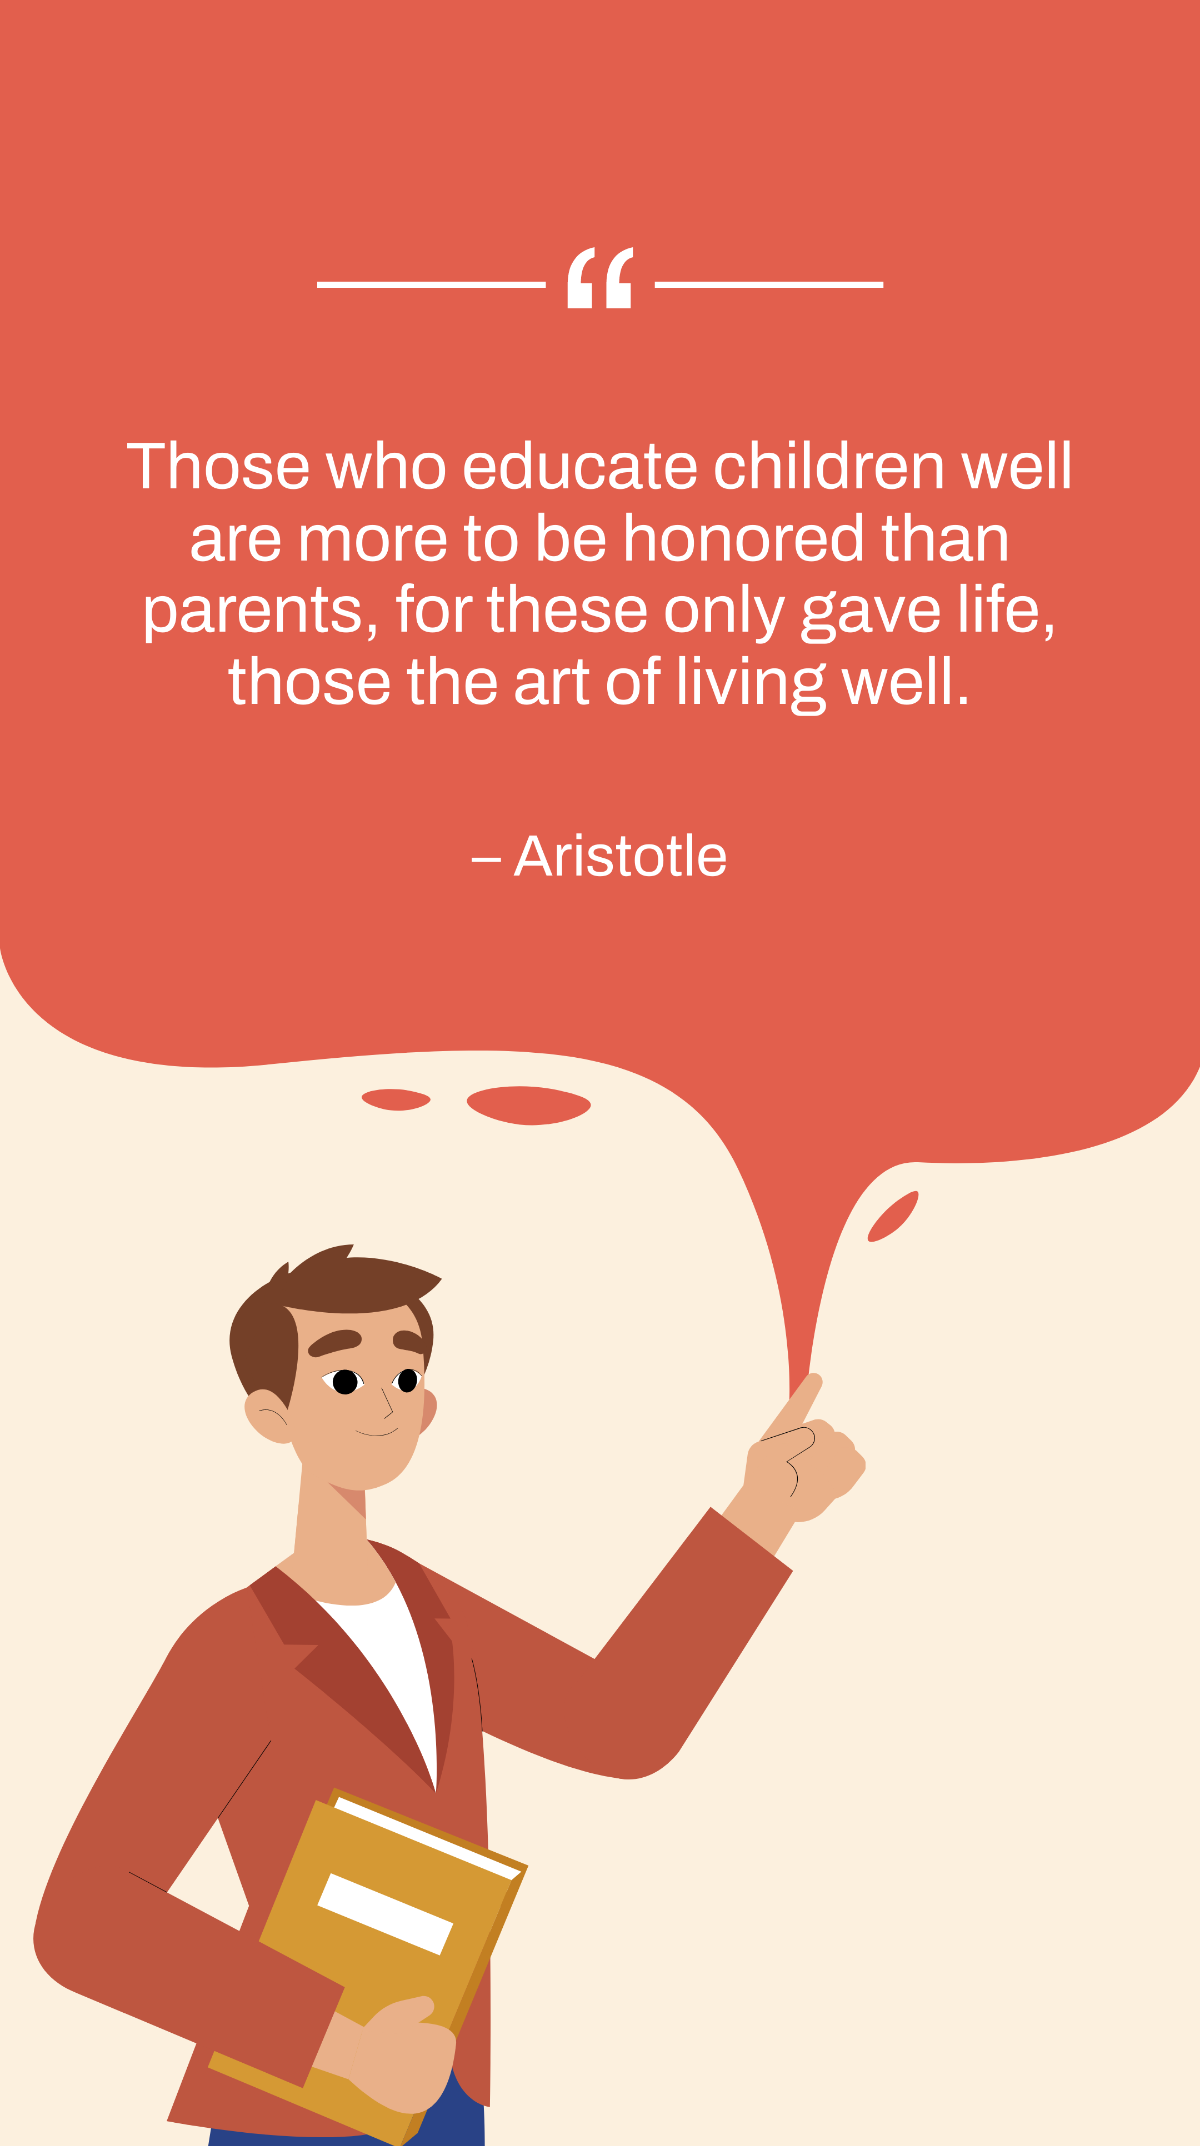 Aristotle - Those who educate children well are more to be honored than parents, for these only gave life, those the art of living well. Template